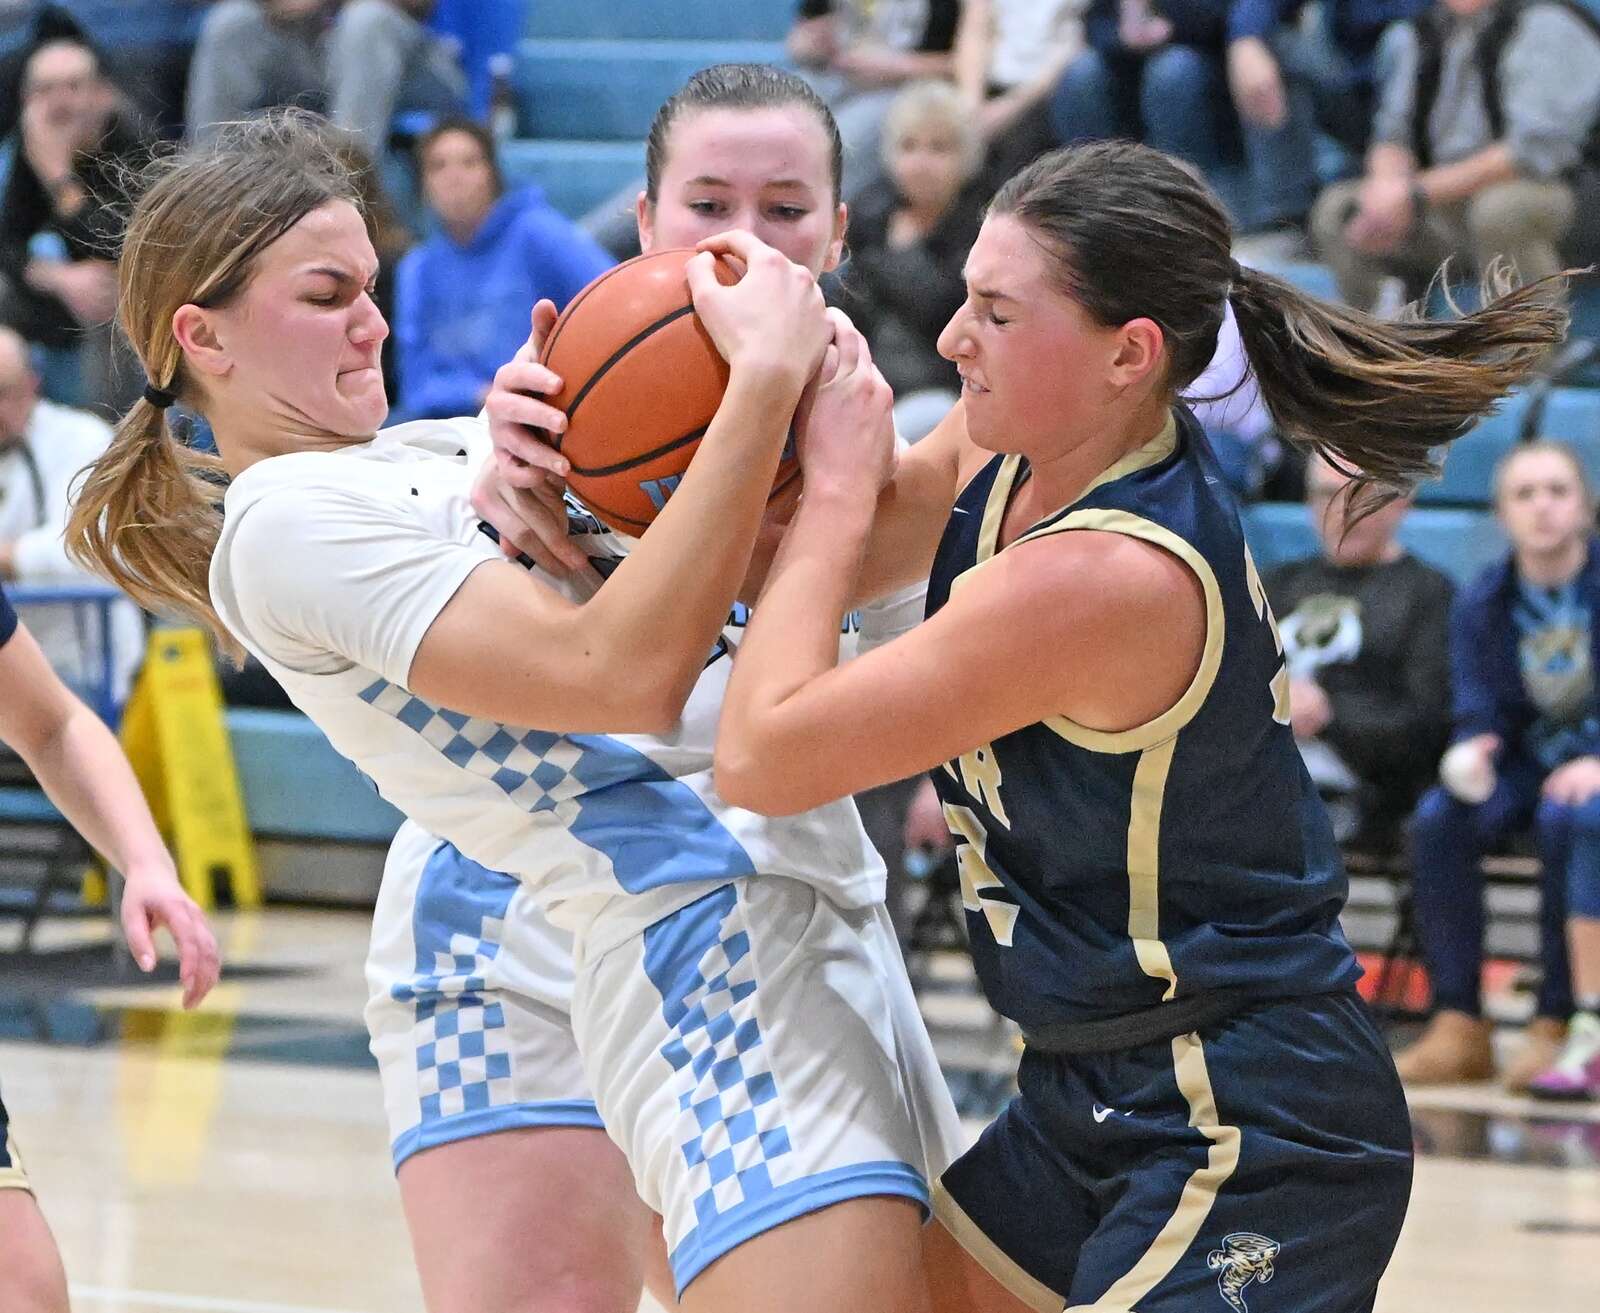 Seneca Valley’s Emerson Peffer fights for a ball against Butler’s Amelia McMichael